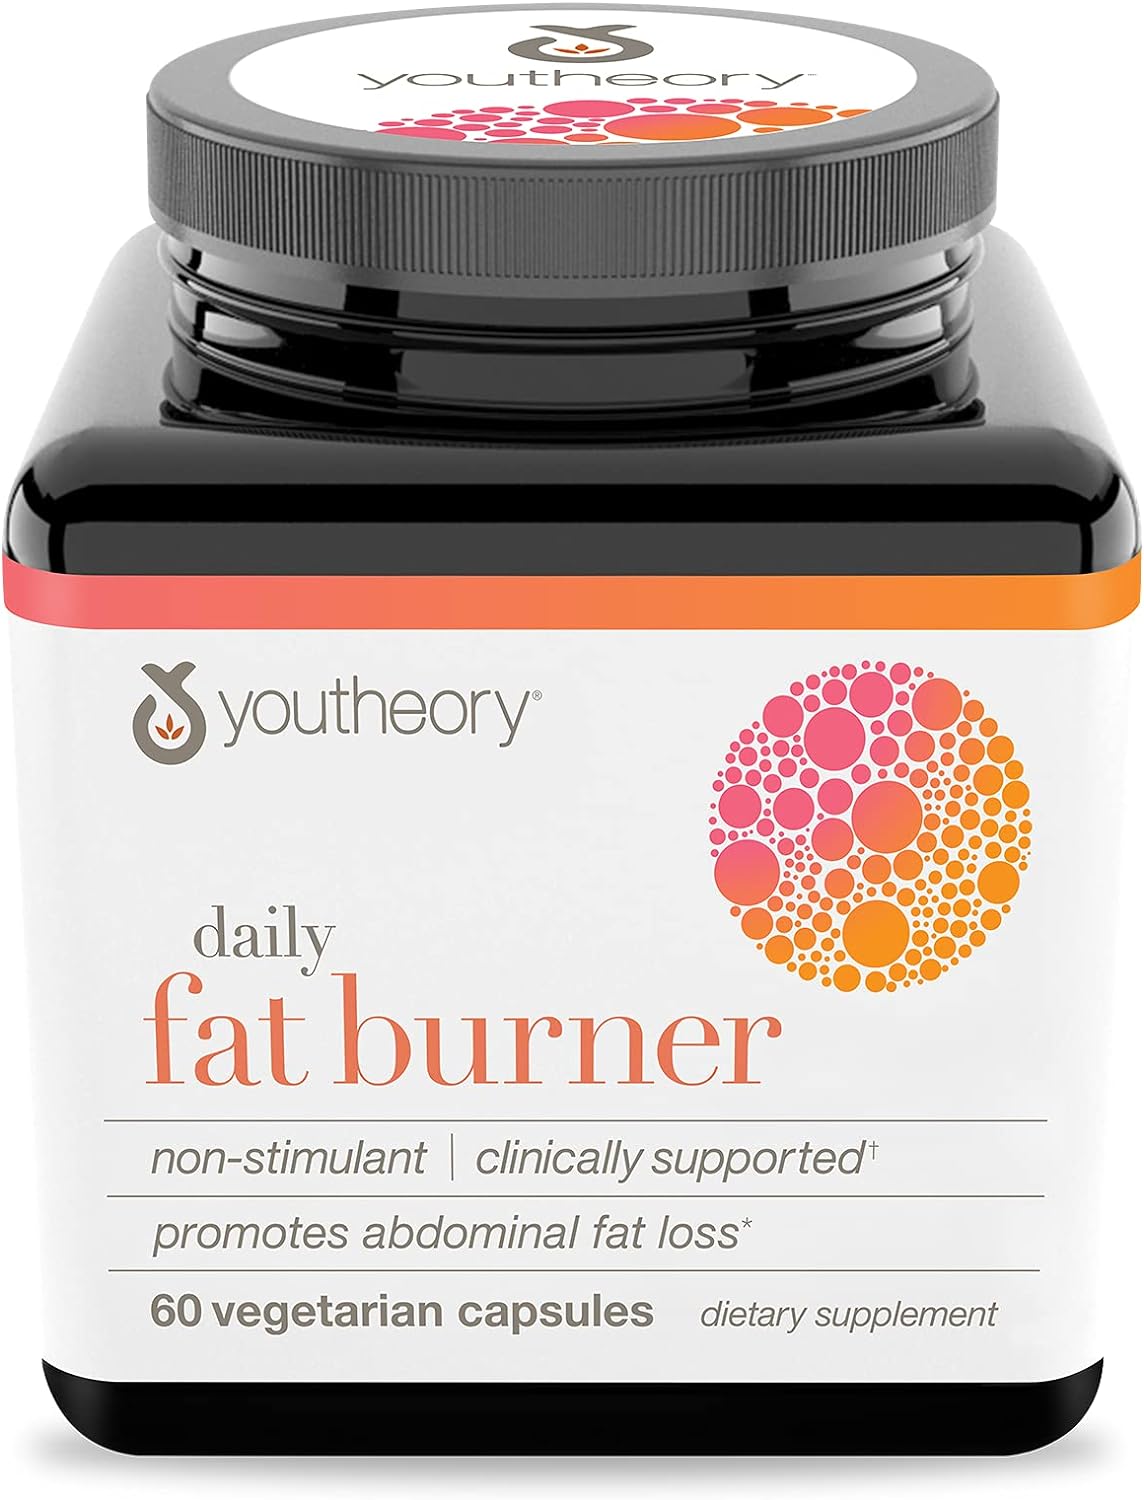 Youtheory Daily Fat Burner Vegetarian Capsules, Healthy Weight Management, 60 capsules